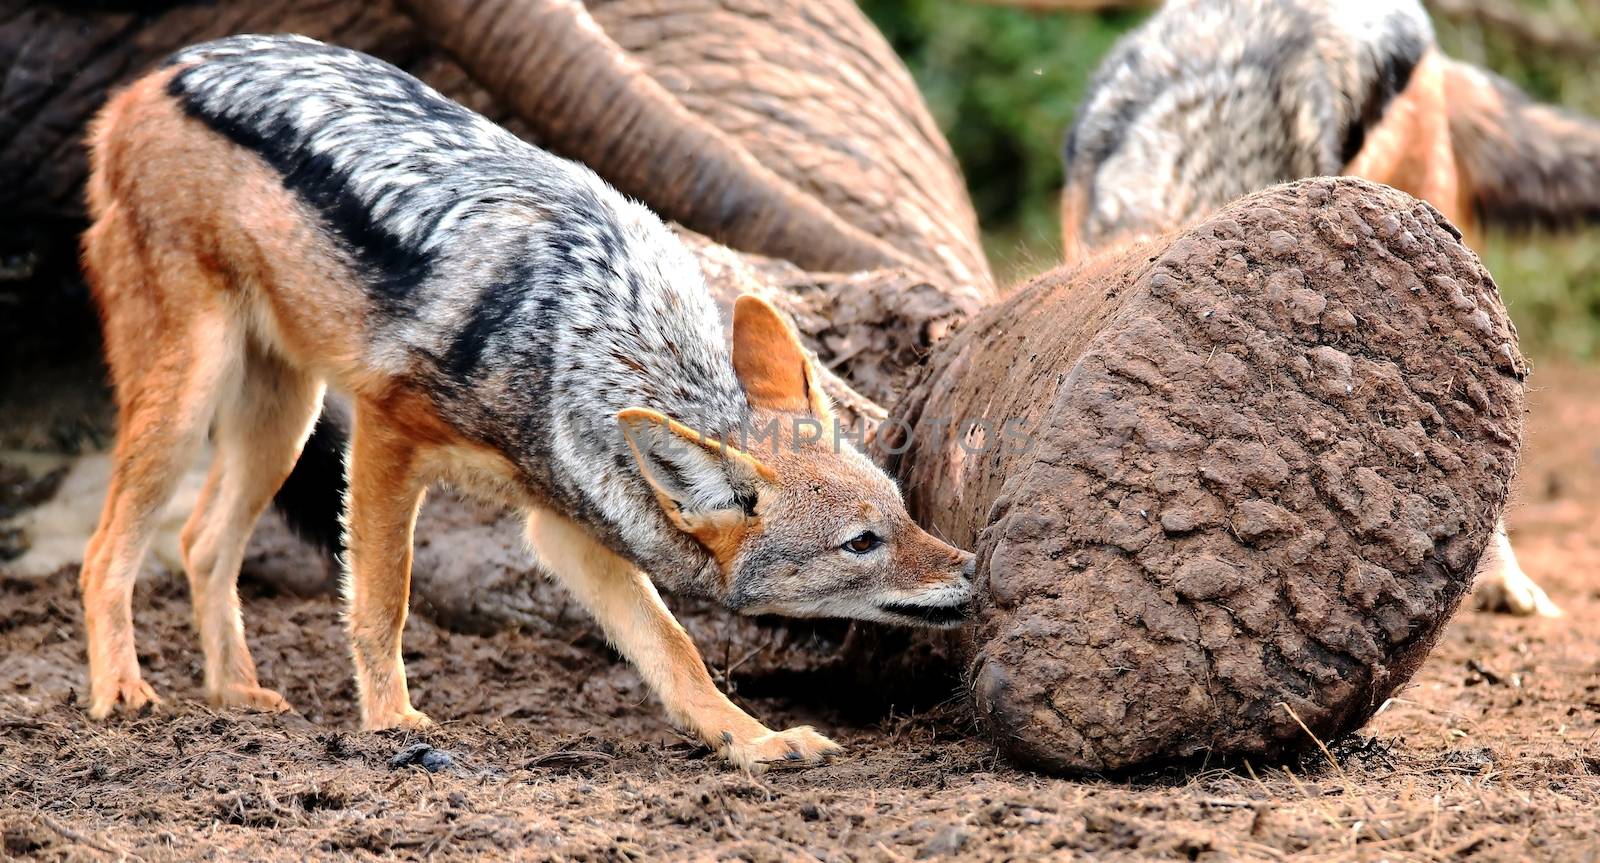 Black backed jackal chewing at the carcass of a dead elephant